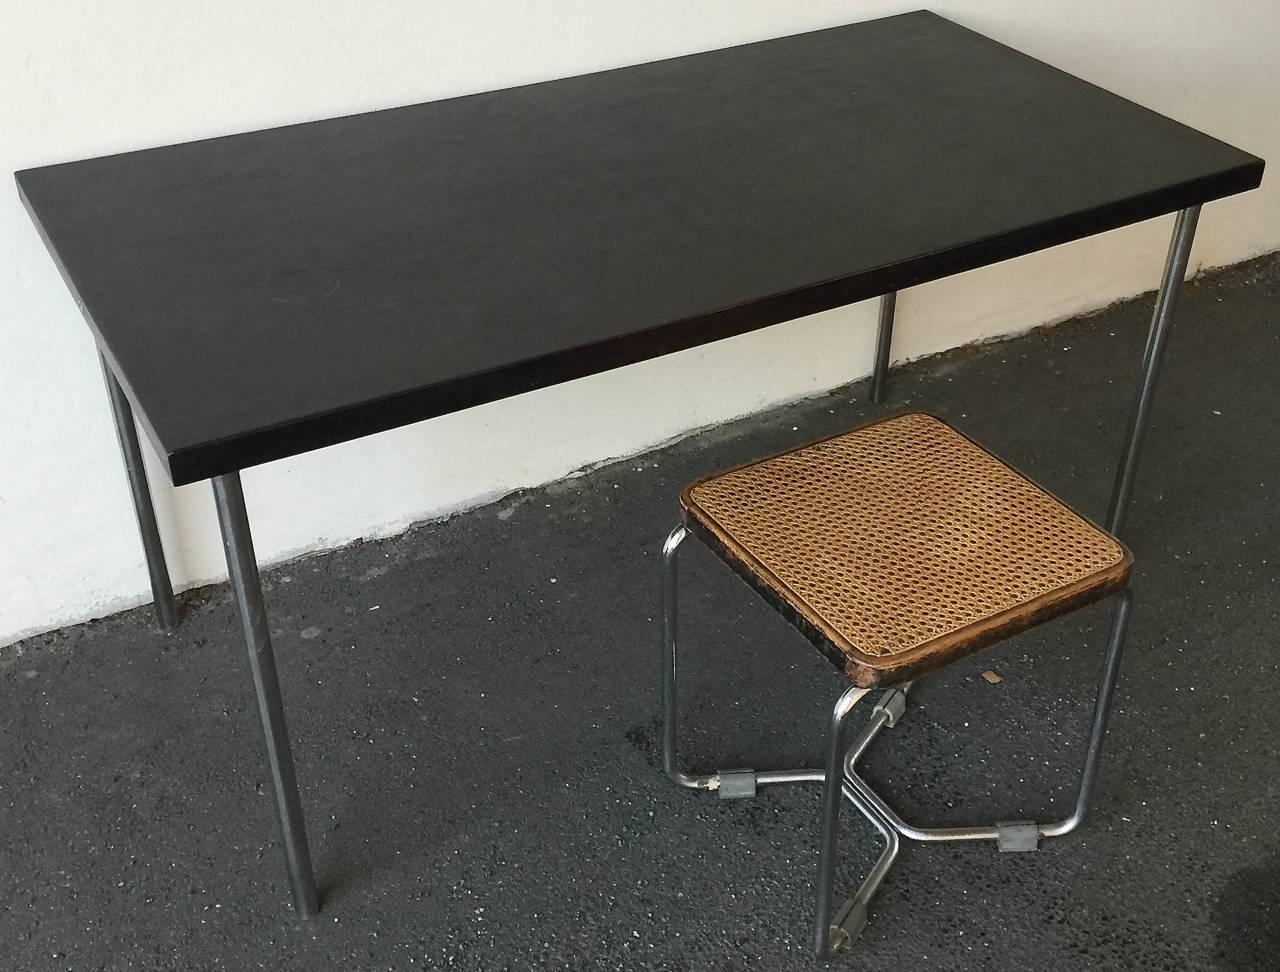 Rare and Early B14 Table or Desk by Marcel Breuer for Thonet 1